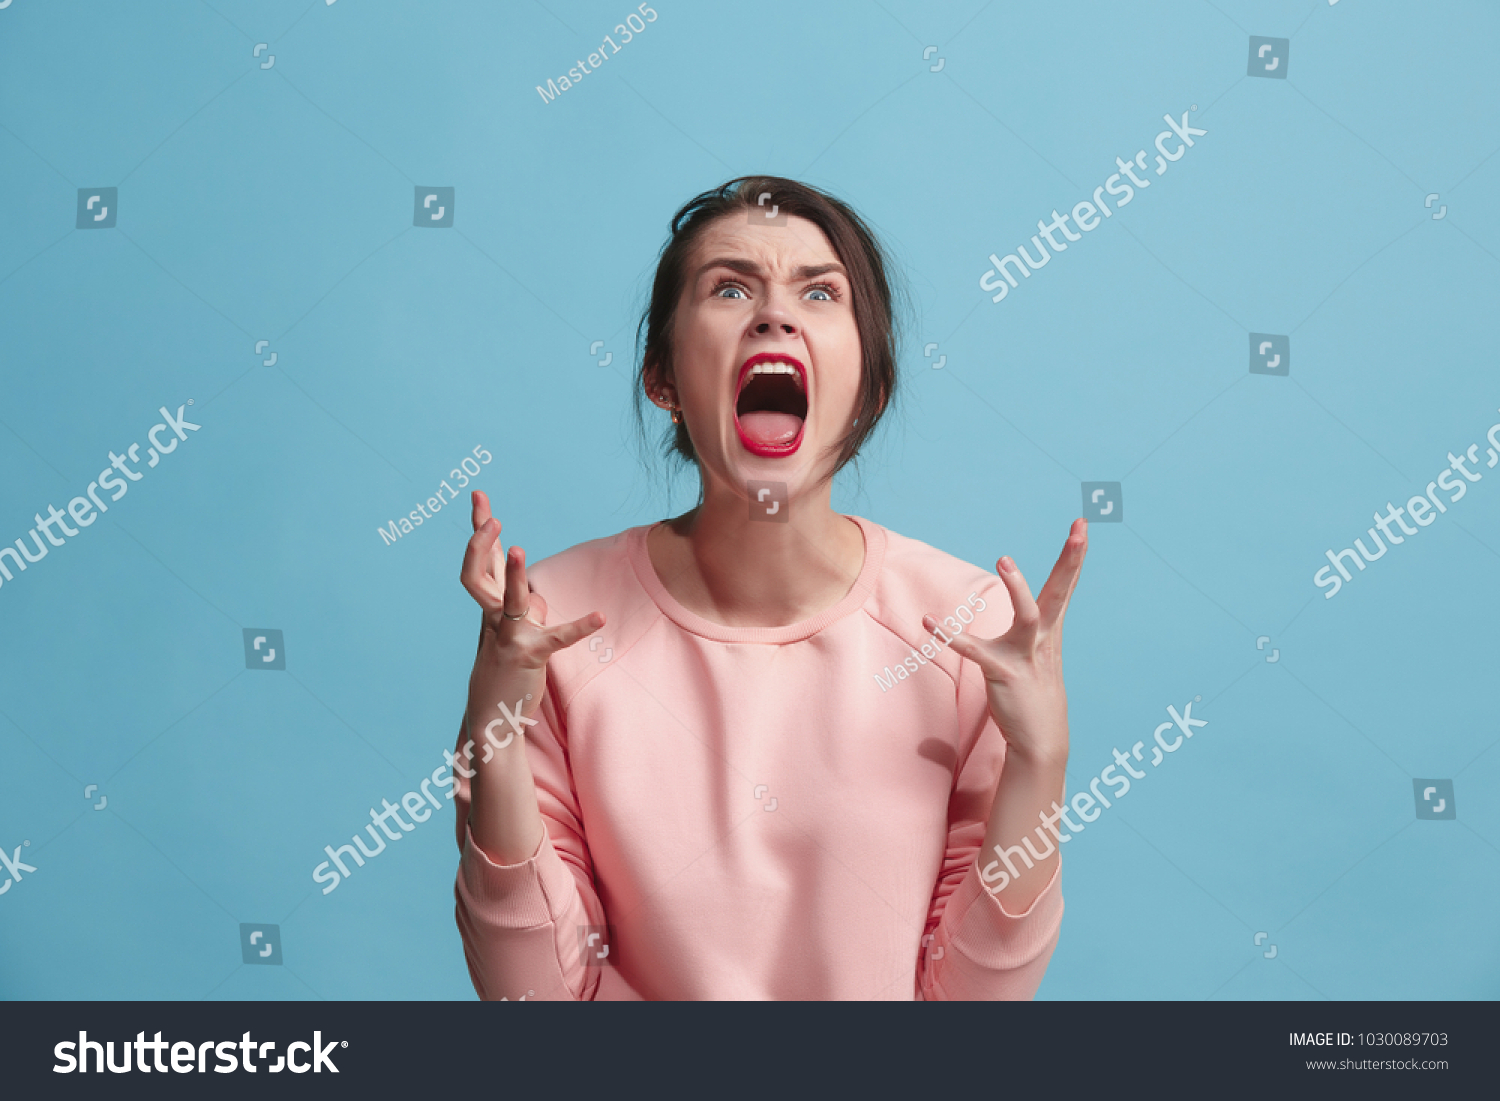 Screaming, hate, rage. Crying emotional angry woman screaming on blue studio background. Emotional, young face. Female half-length portrait. Human emotions, facial expression concept. Trendy colors #1030089703